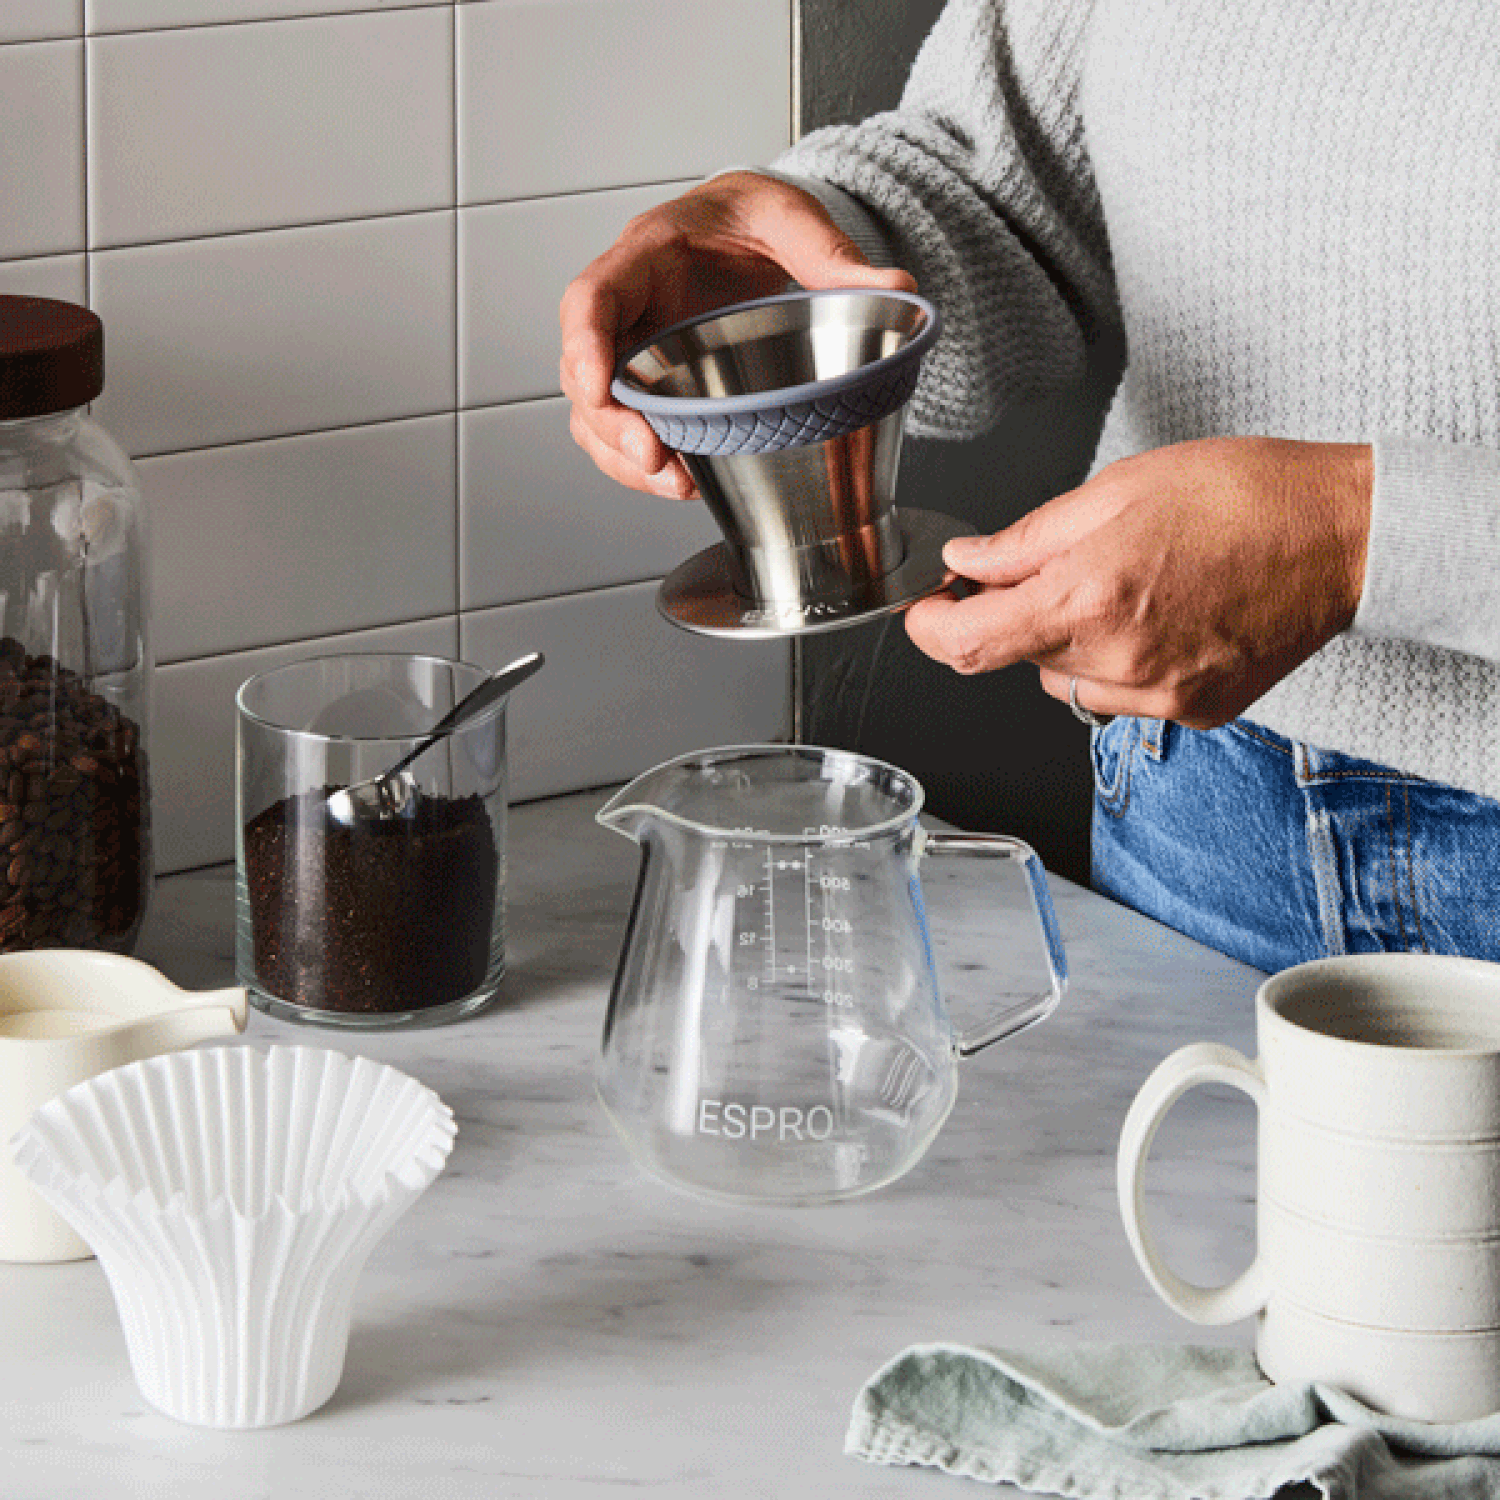 ESPRO Bloom Pour Over Coffee Brewing Kit